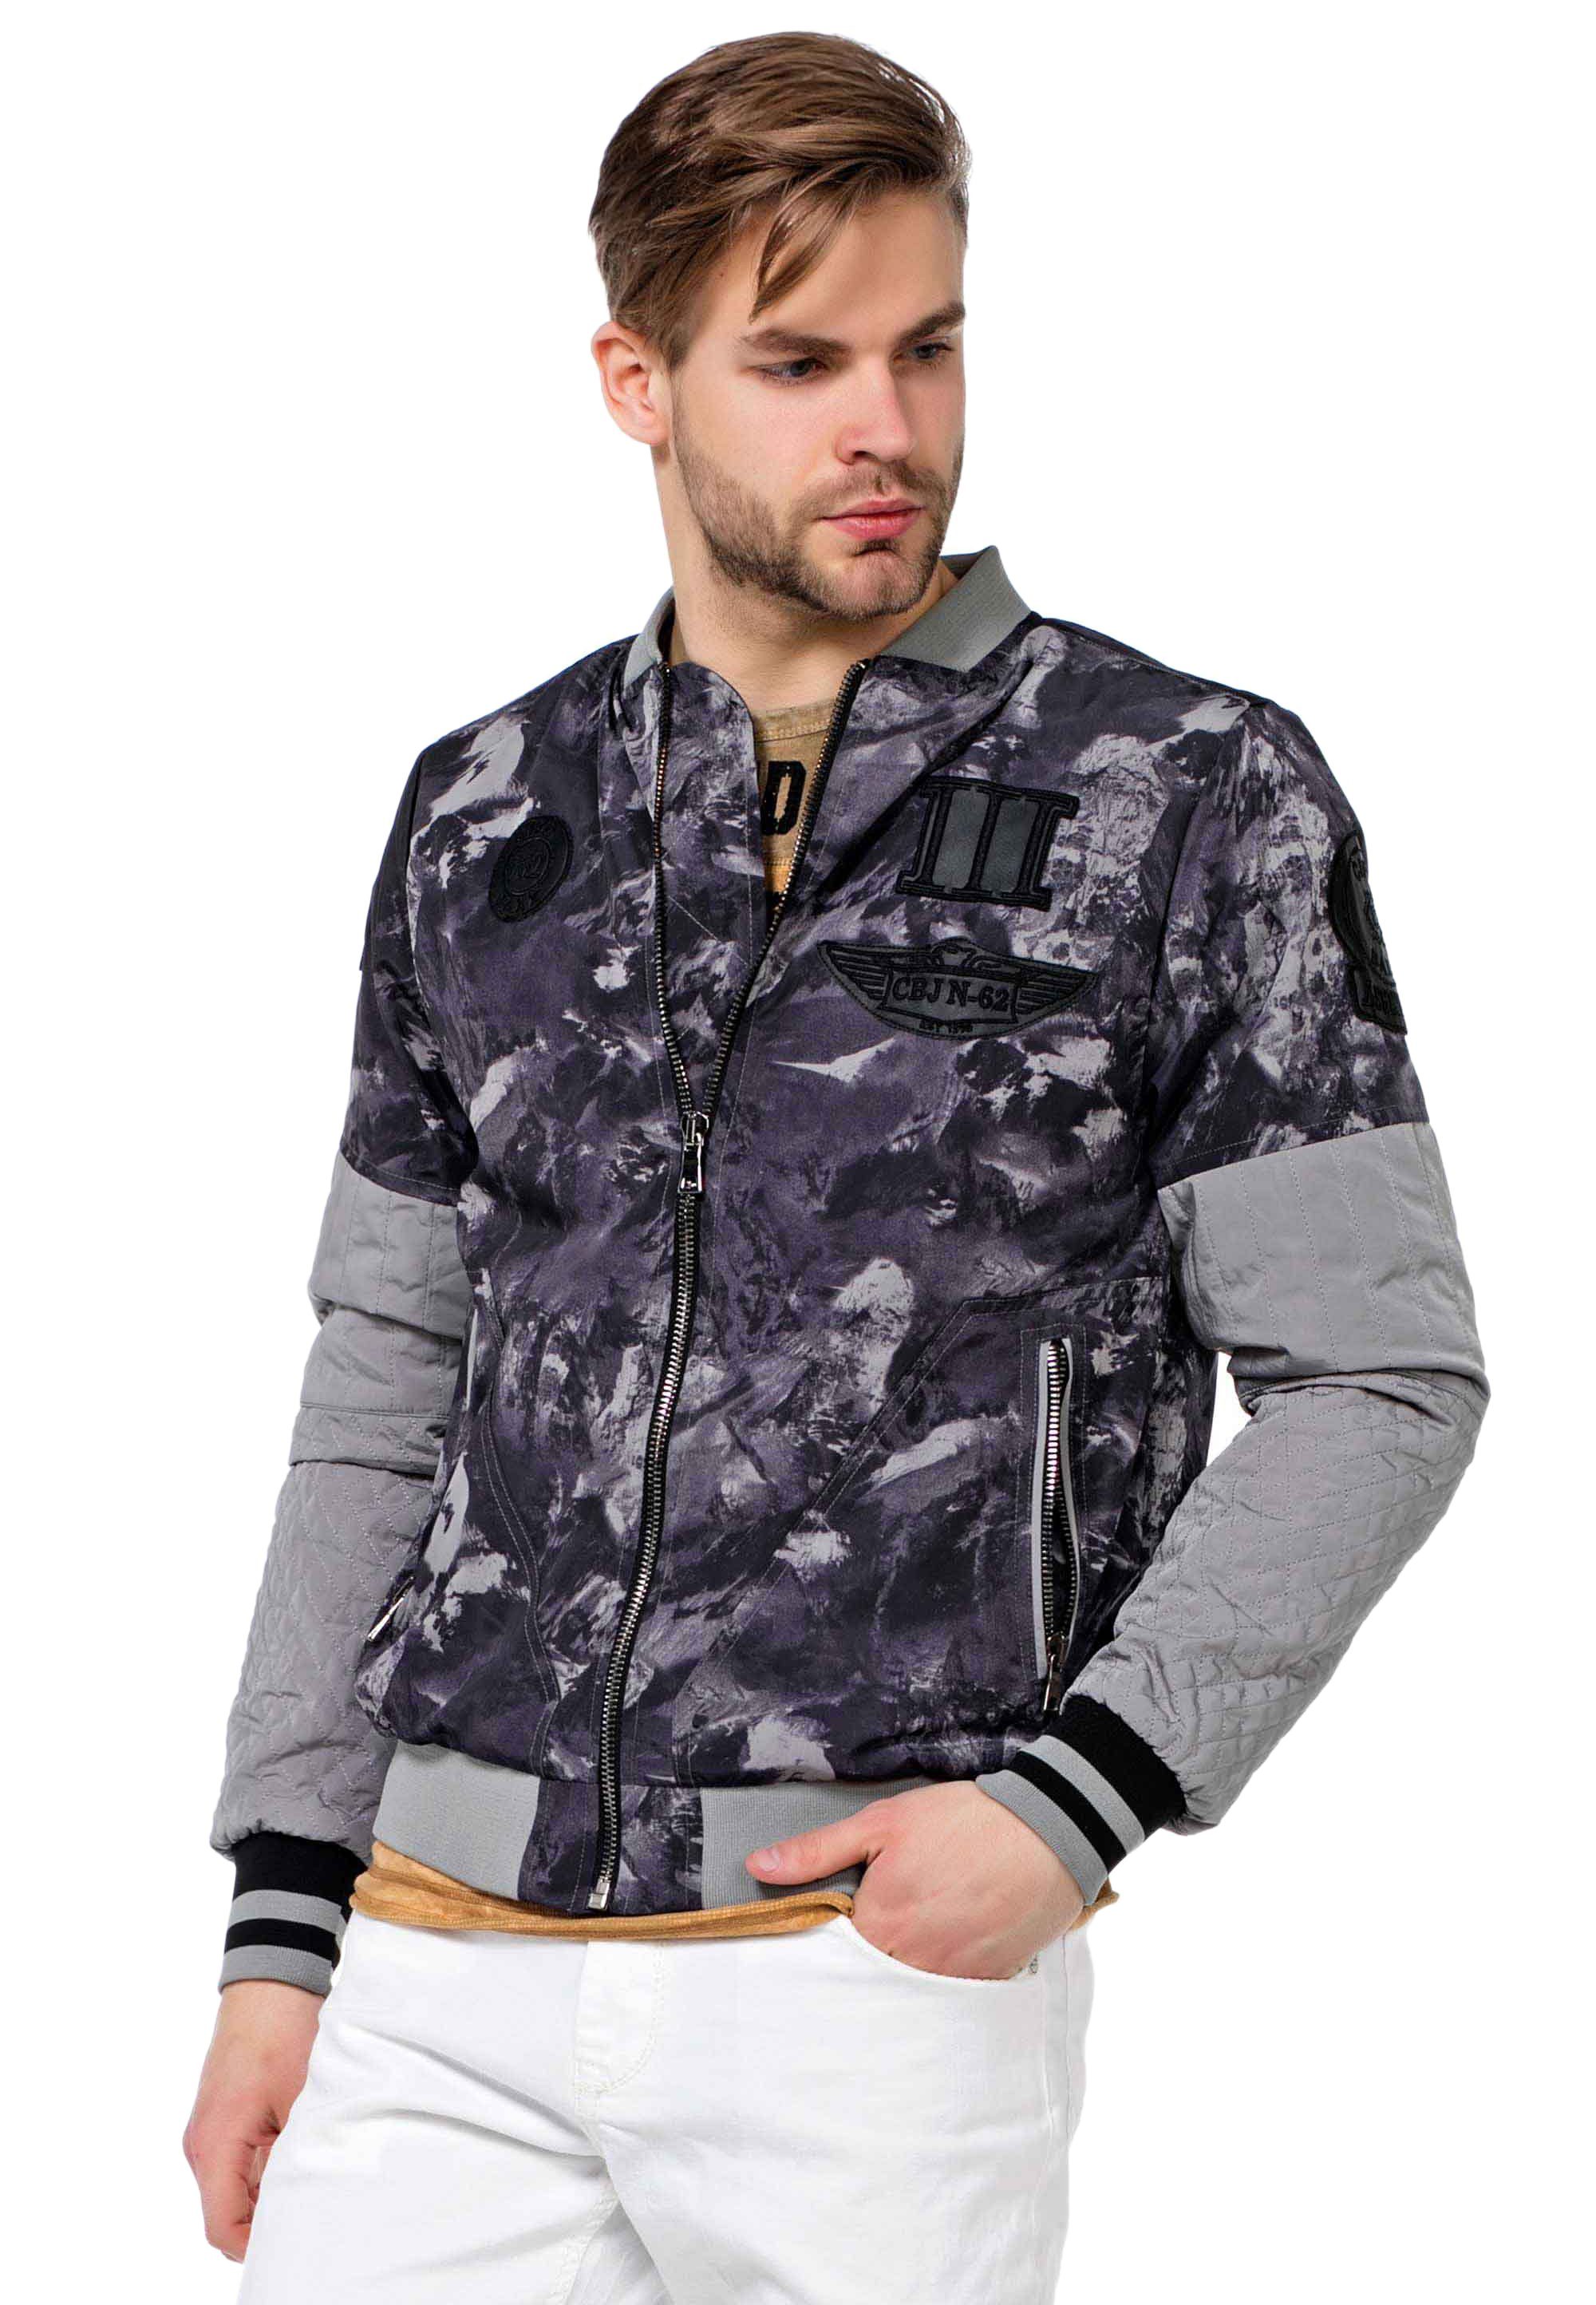 Cipo & in Baxx Military-Style Collegejacke grau coolem